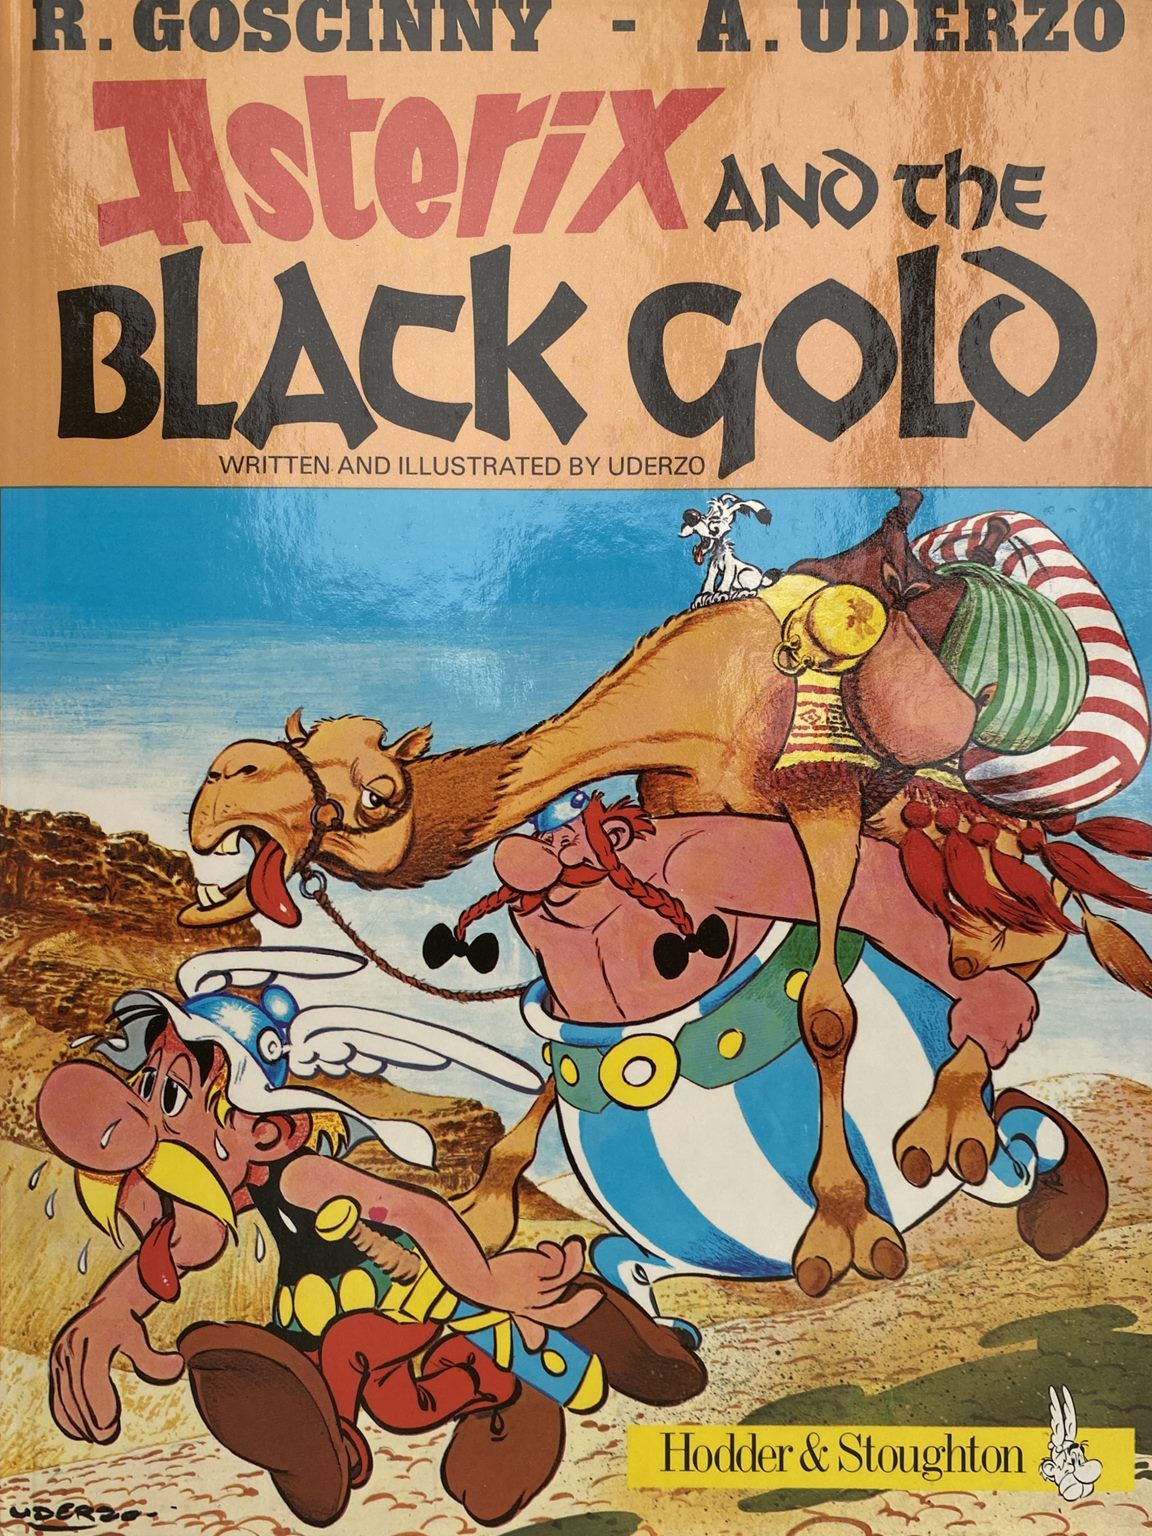 ASTERIX and the BLACK GOLD